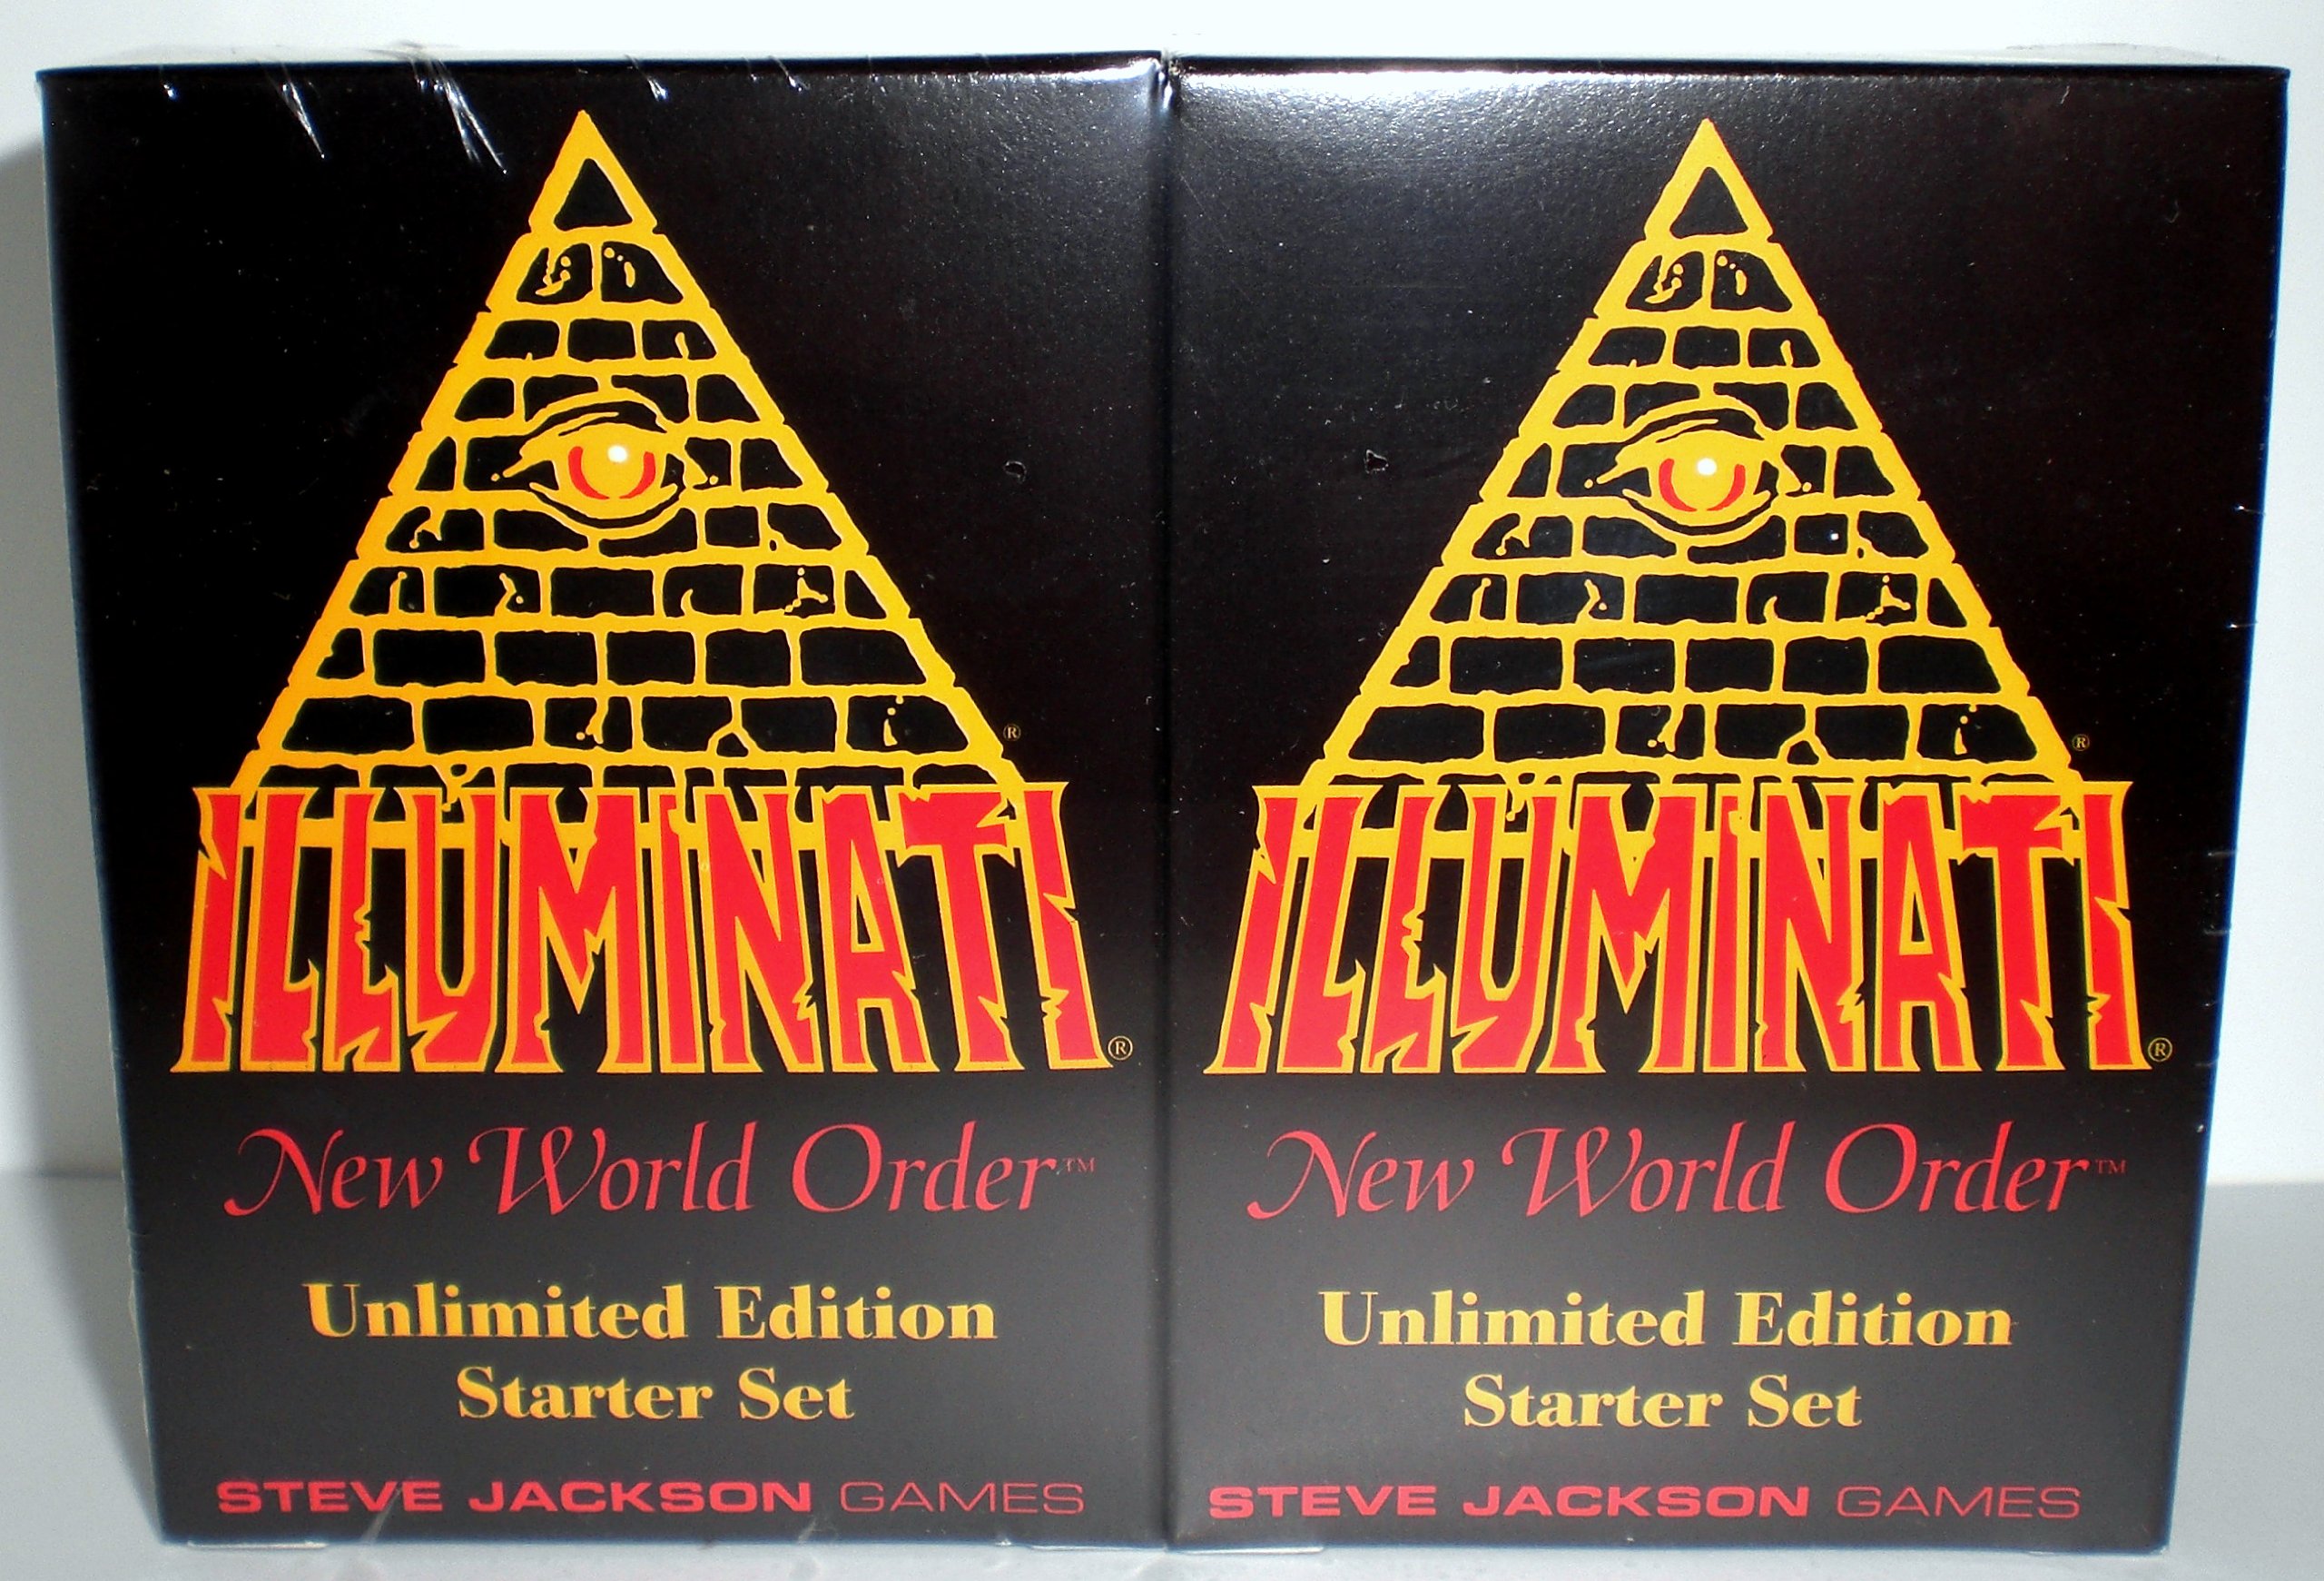 Illuminati New World Order Card Game Unlimited Edition Starter set Second Printing with colored Titles by Steve Jackson 1994-1995